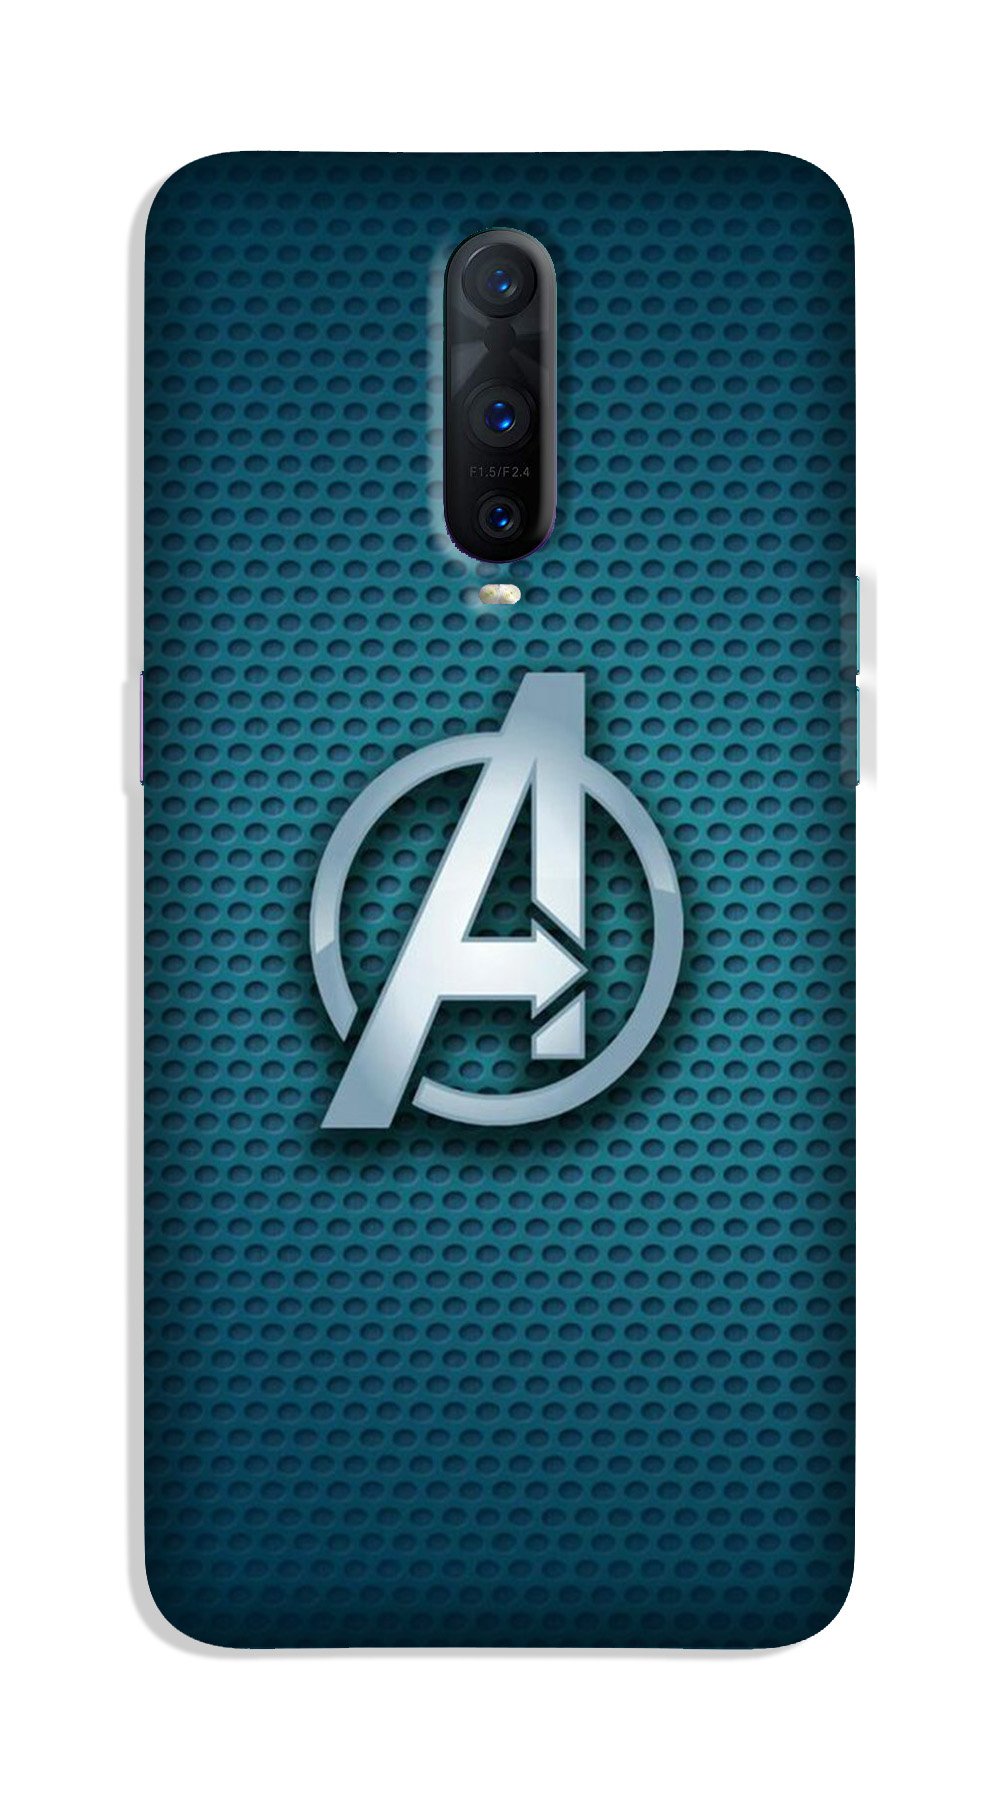 Avengers Case for OnePlus 7 Pro (Design No. 246)